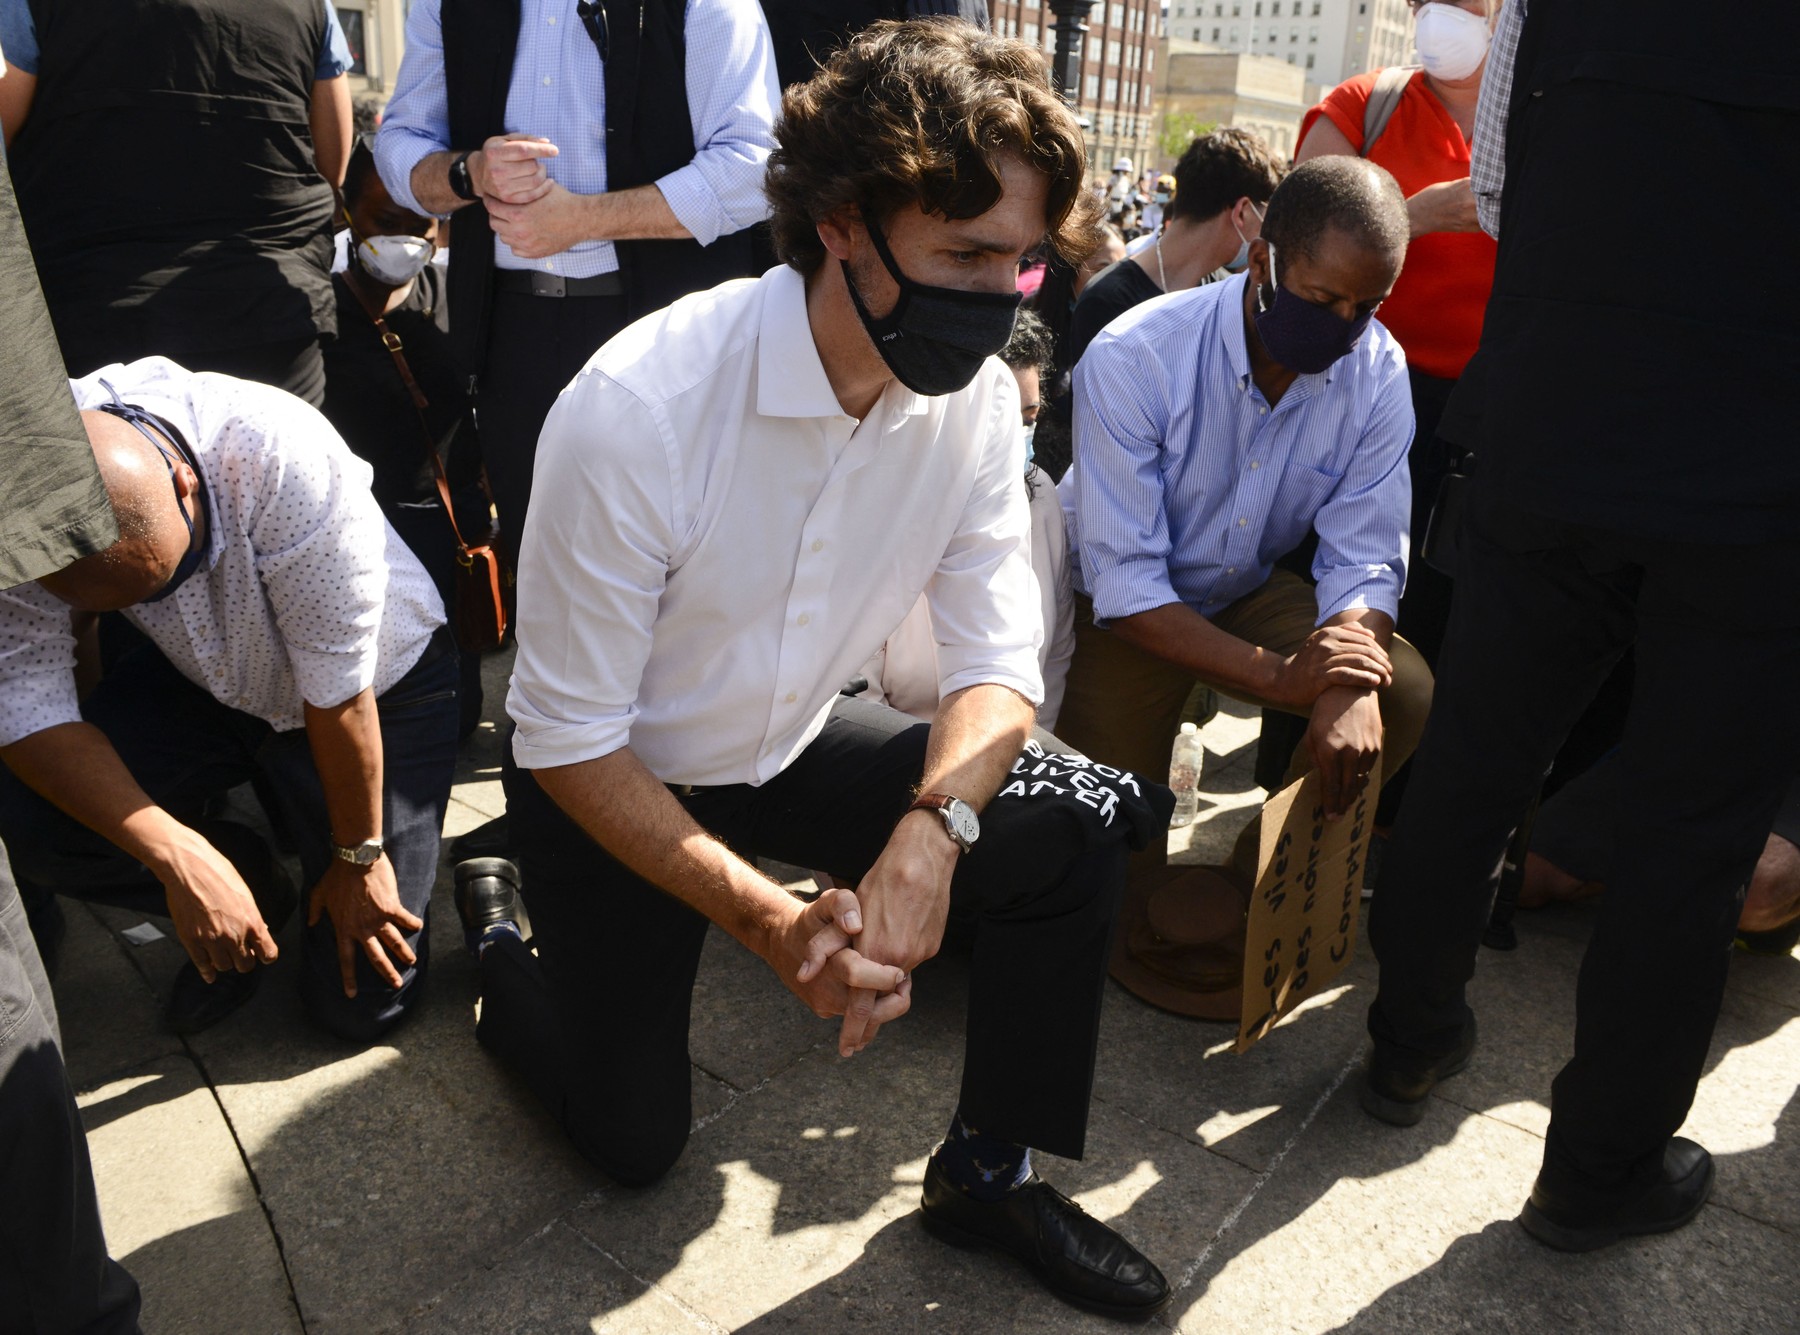 Prime Minister Justin Trudeau takes a knee during an 8 minute and 46 second silence as he takes part in an anti-racism protest on Parliament Hill during the COVID-19 pandemic in Ottawa on Friday, June 5, 2020. He is joined by Minister of Families, Children and Social Development Ahmed Hussen, left and Liberal MP Greg Fergus, right.,Image: 527633942, License: Rights-managed, Restrictions: , Model Release: no, Credit line: Kilpatrick Sean/CP/ABACA / Abaca Press / Profimedia